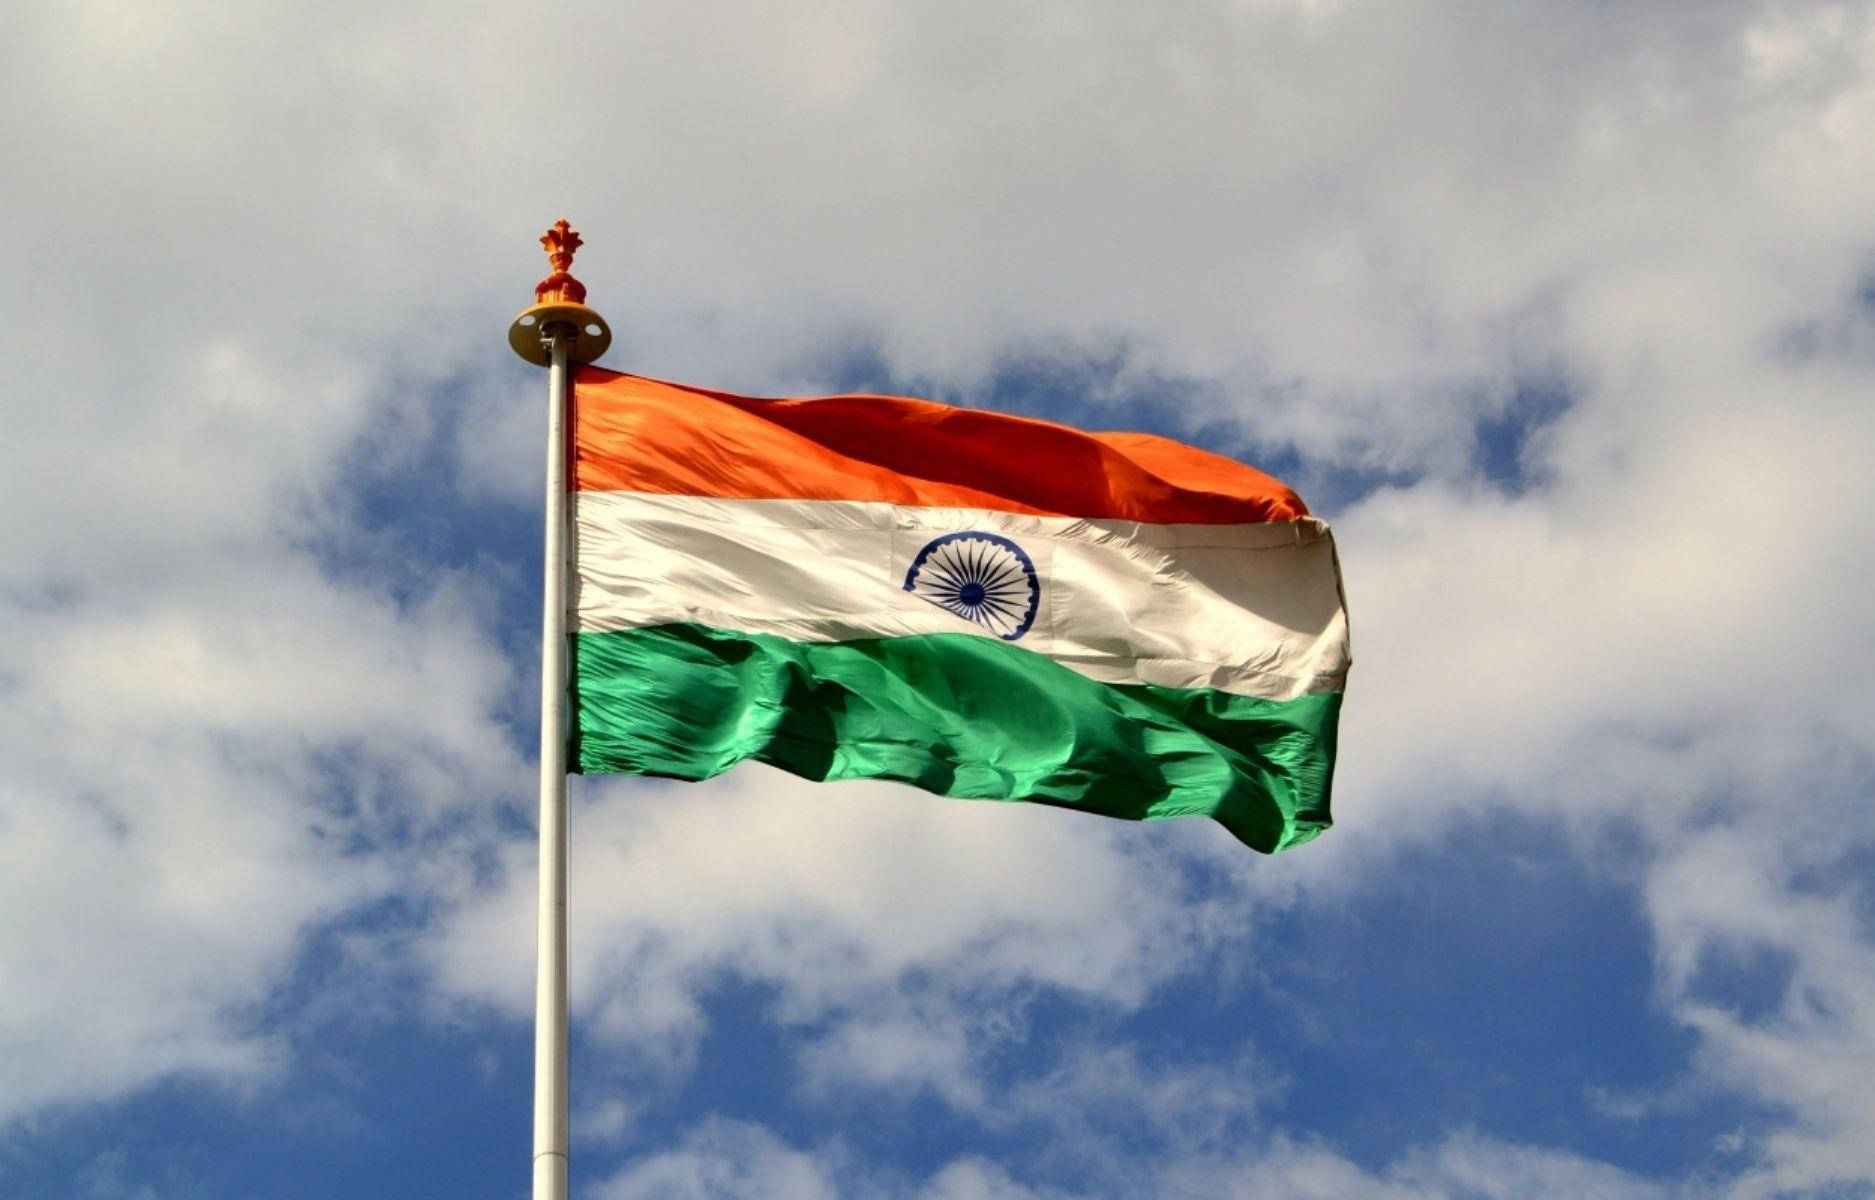 Real Indian Flag Hd In A Pole Wallpaper